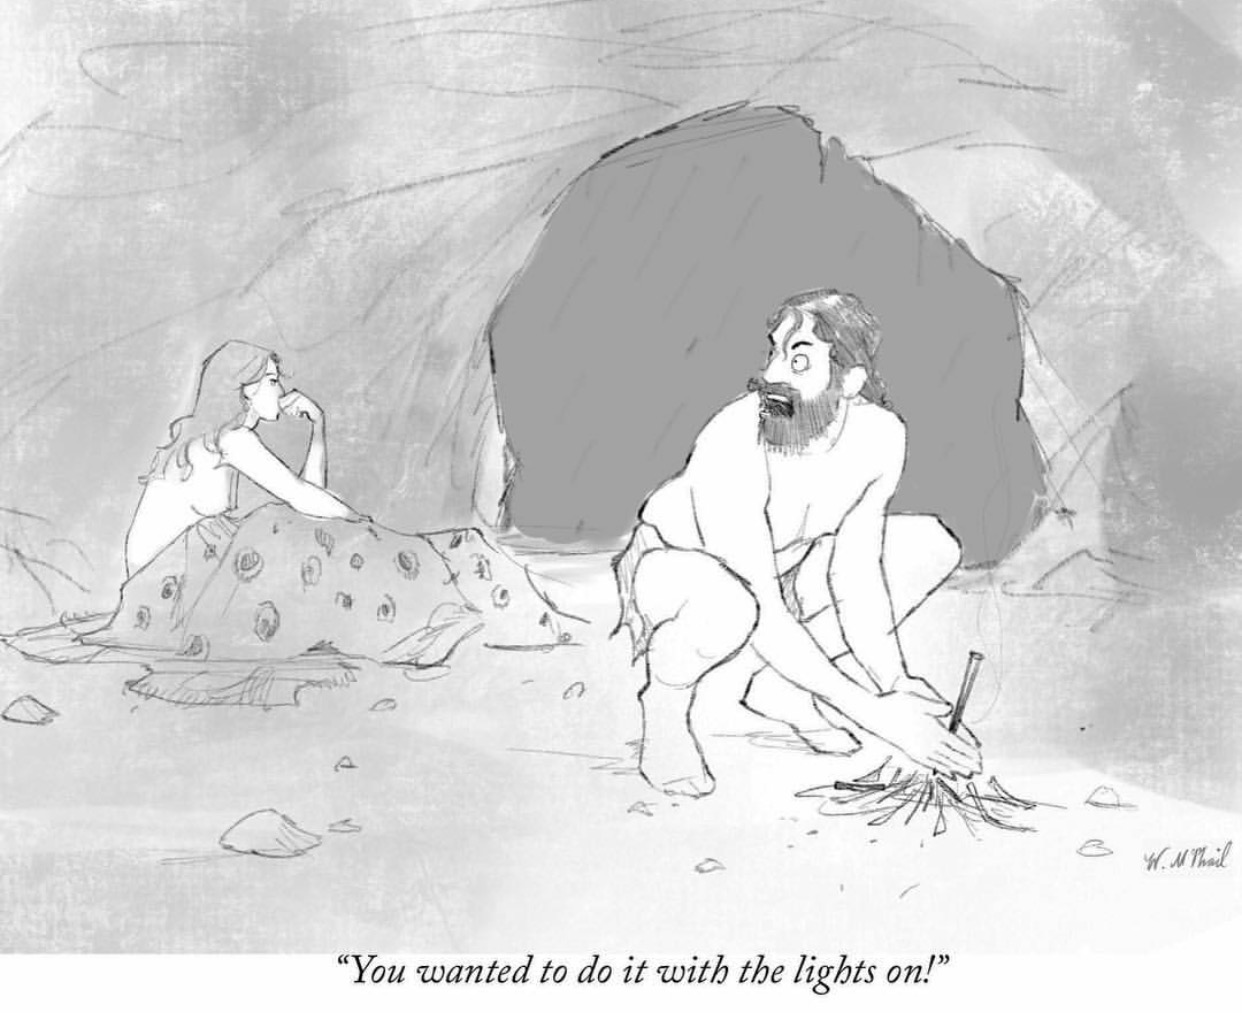 Funny cartoon about caveman doing it with the lights on.